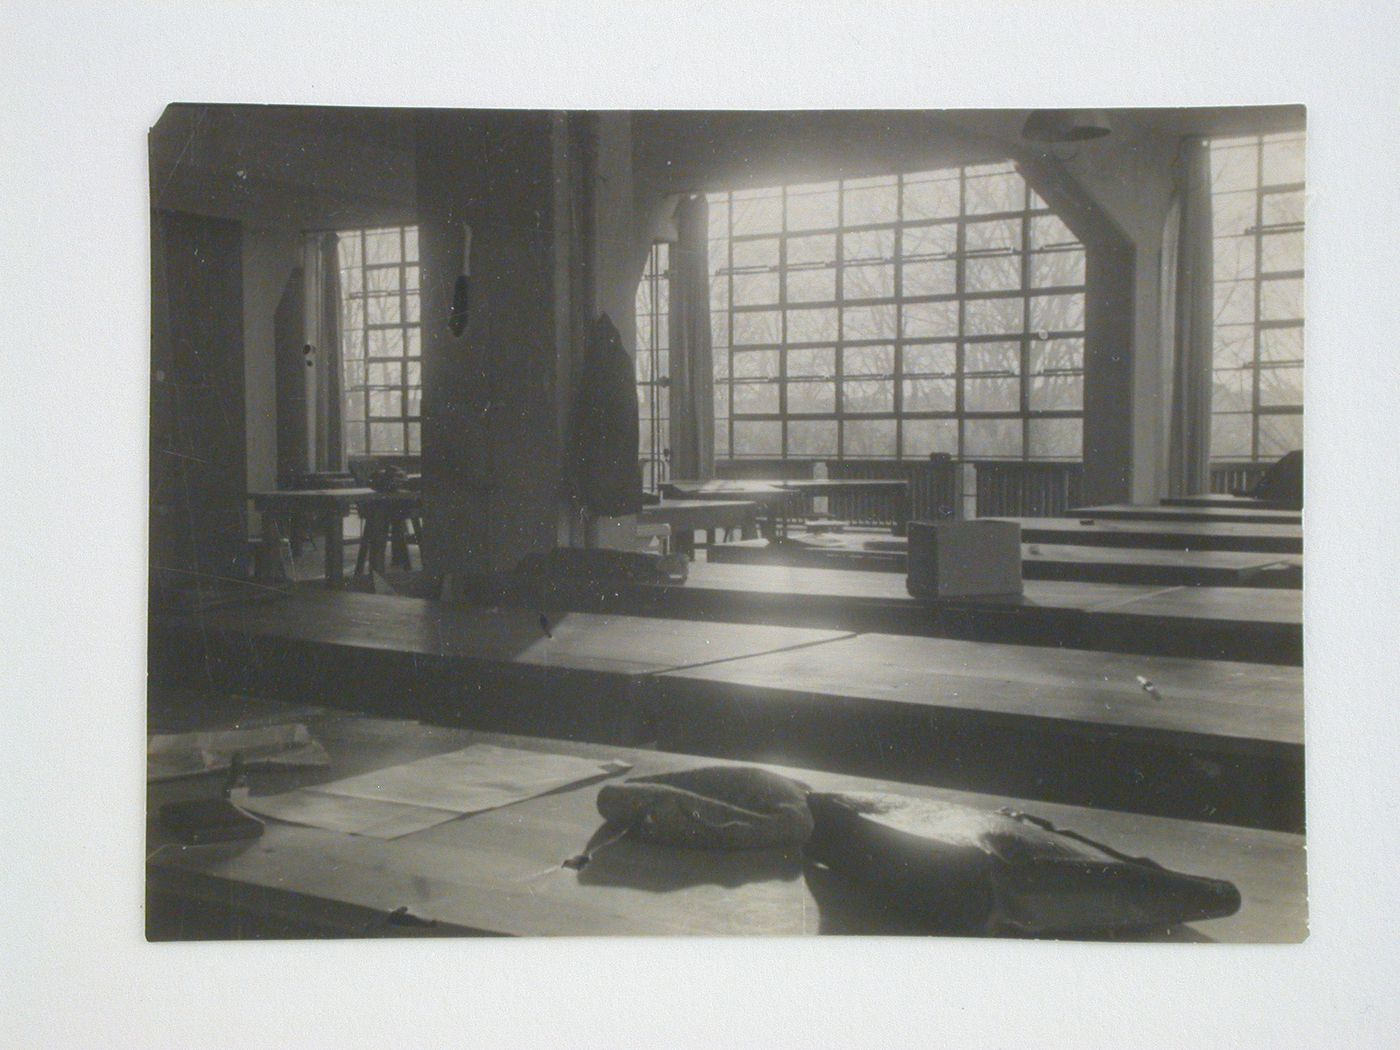 Interior view of the Bauhaus building showing the preliminary course workshop, Dessau, Germany